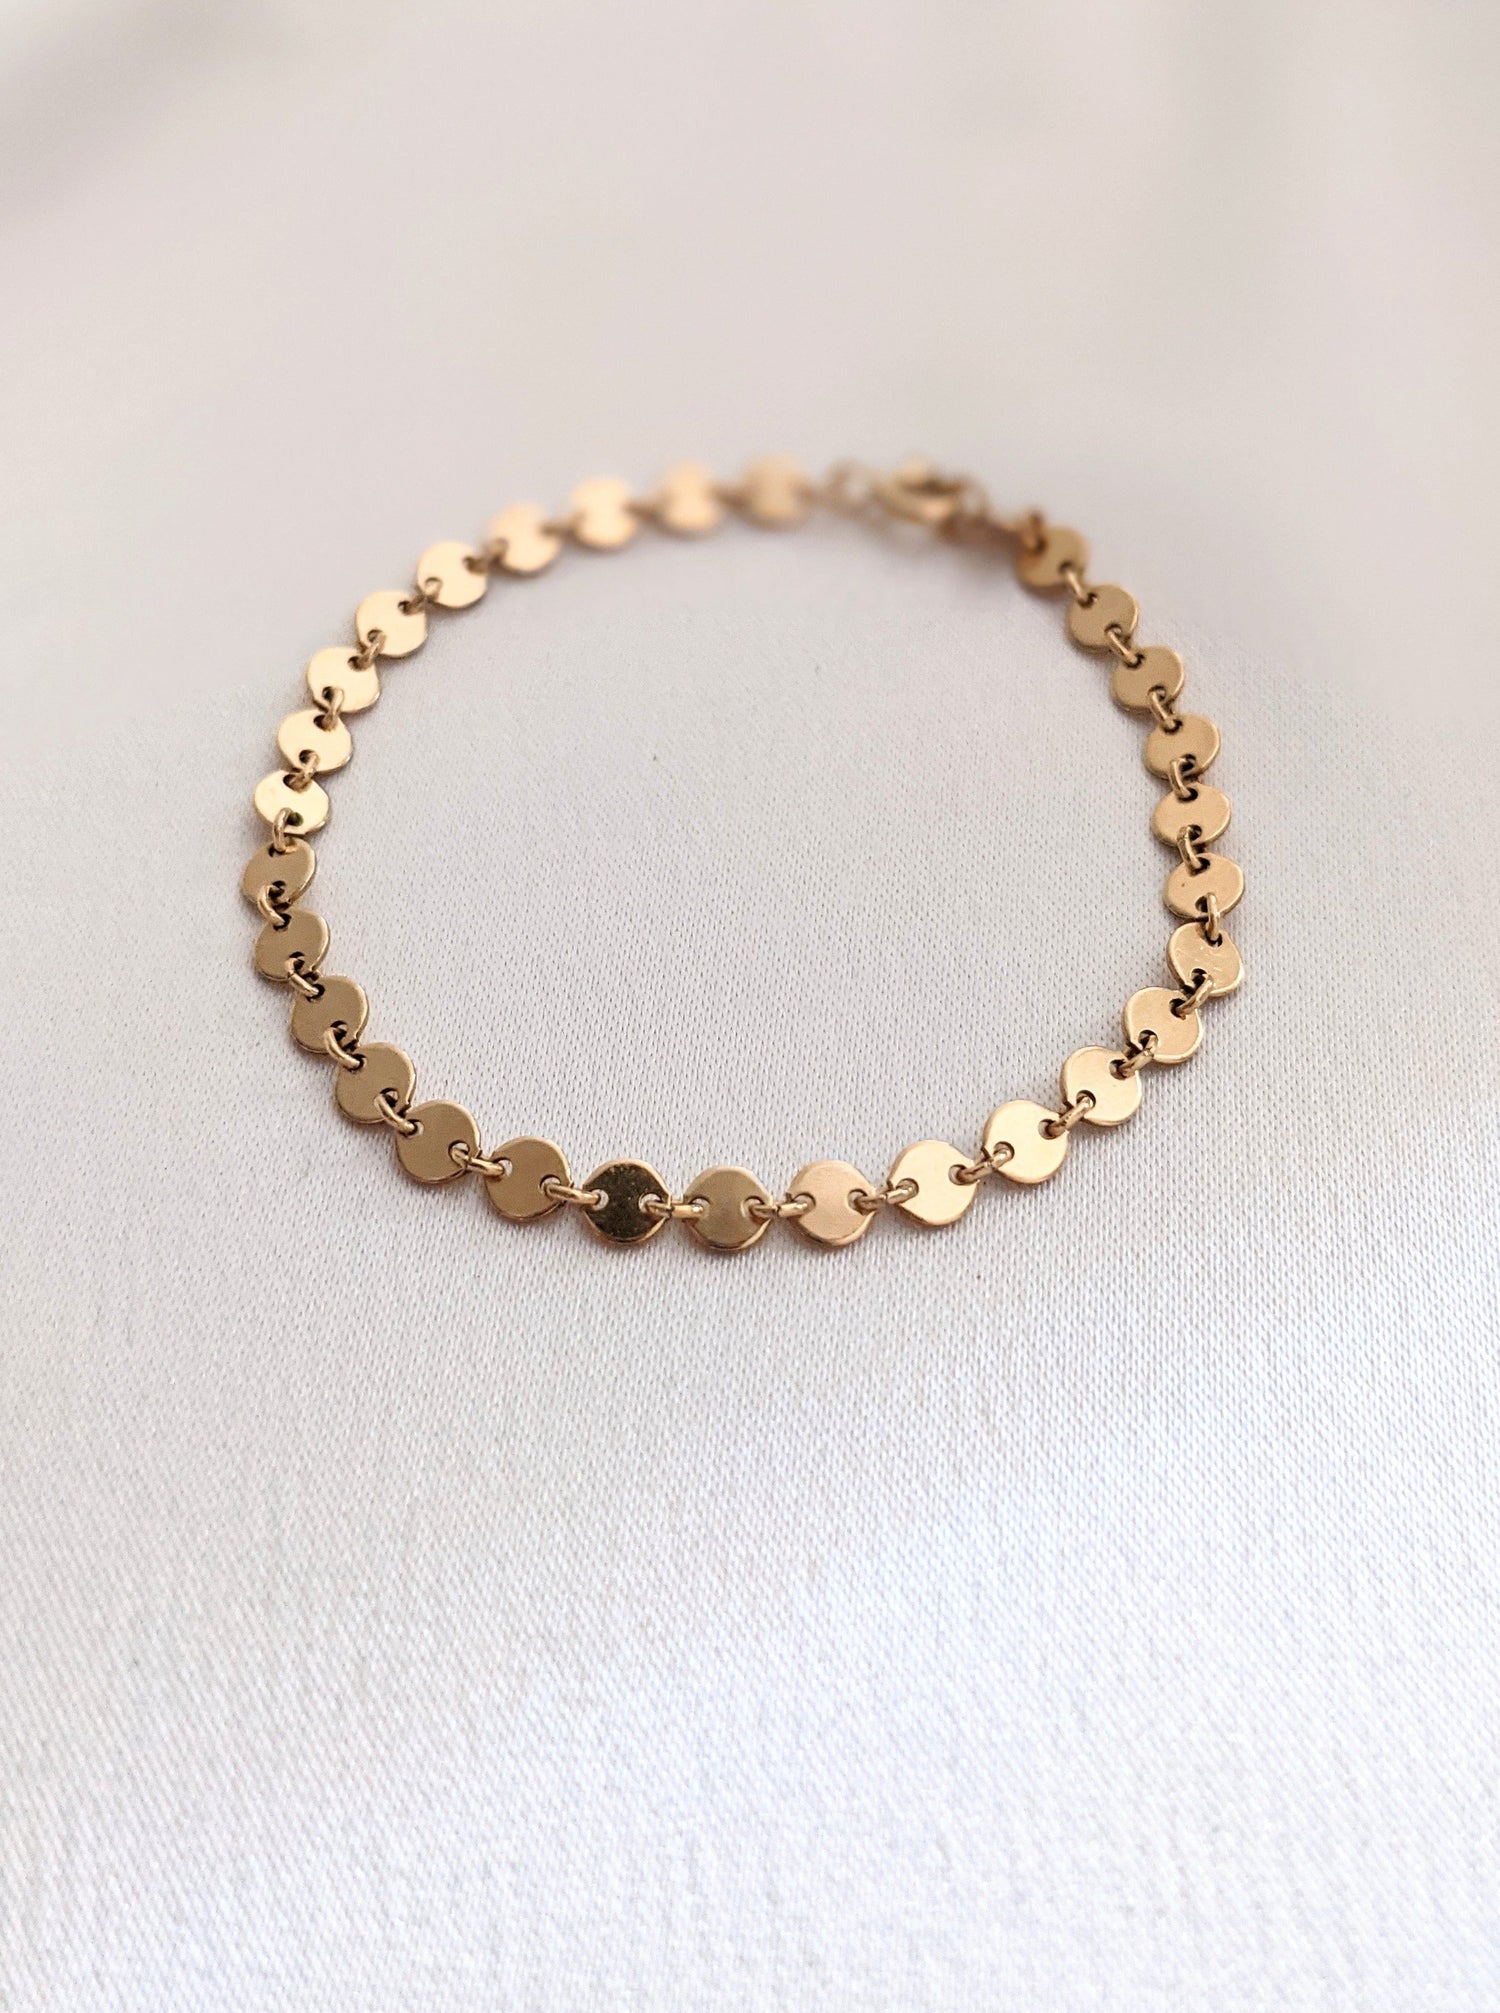 Disc Chain Bracelet Layer the Love